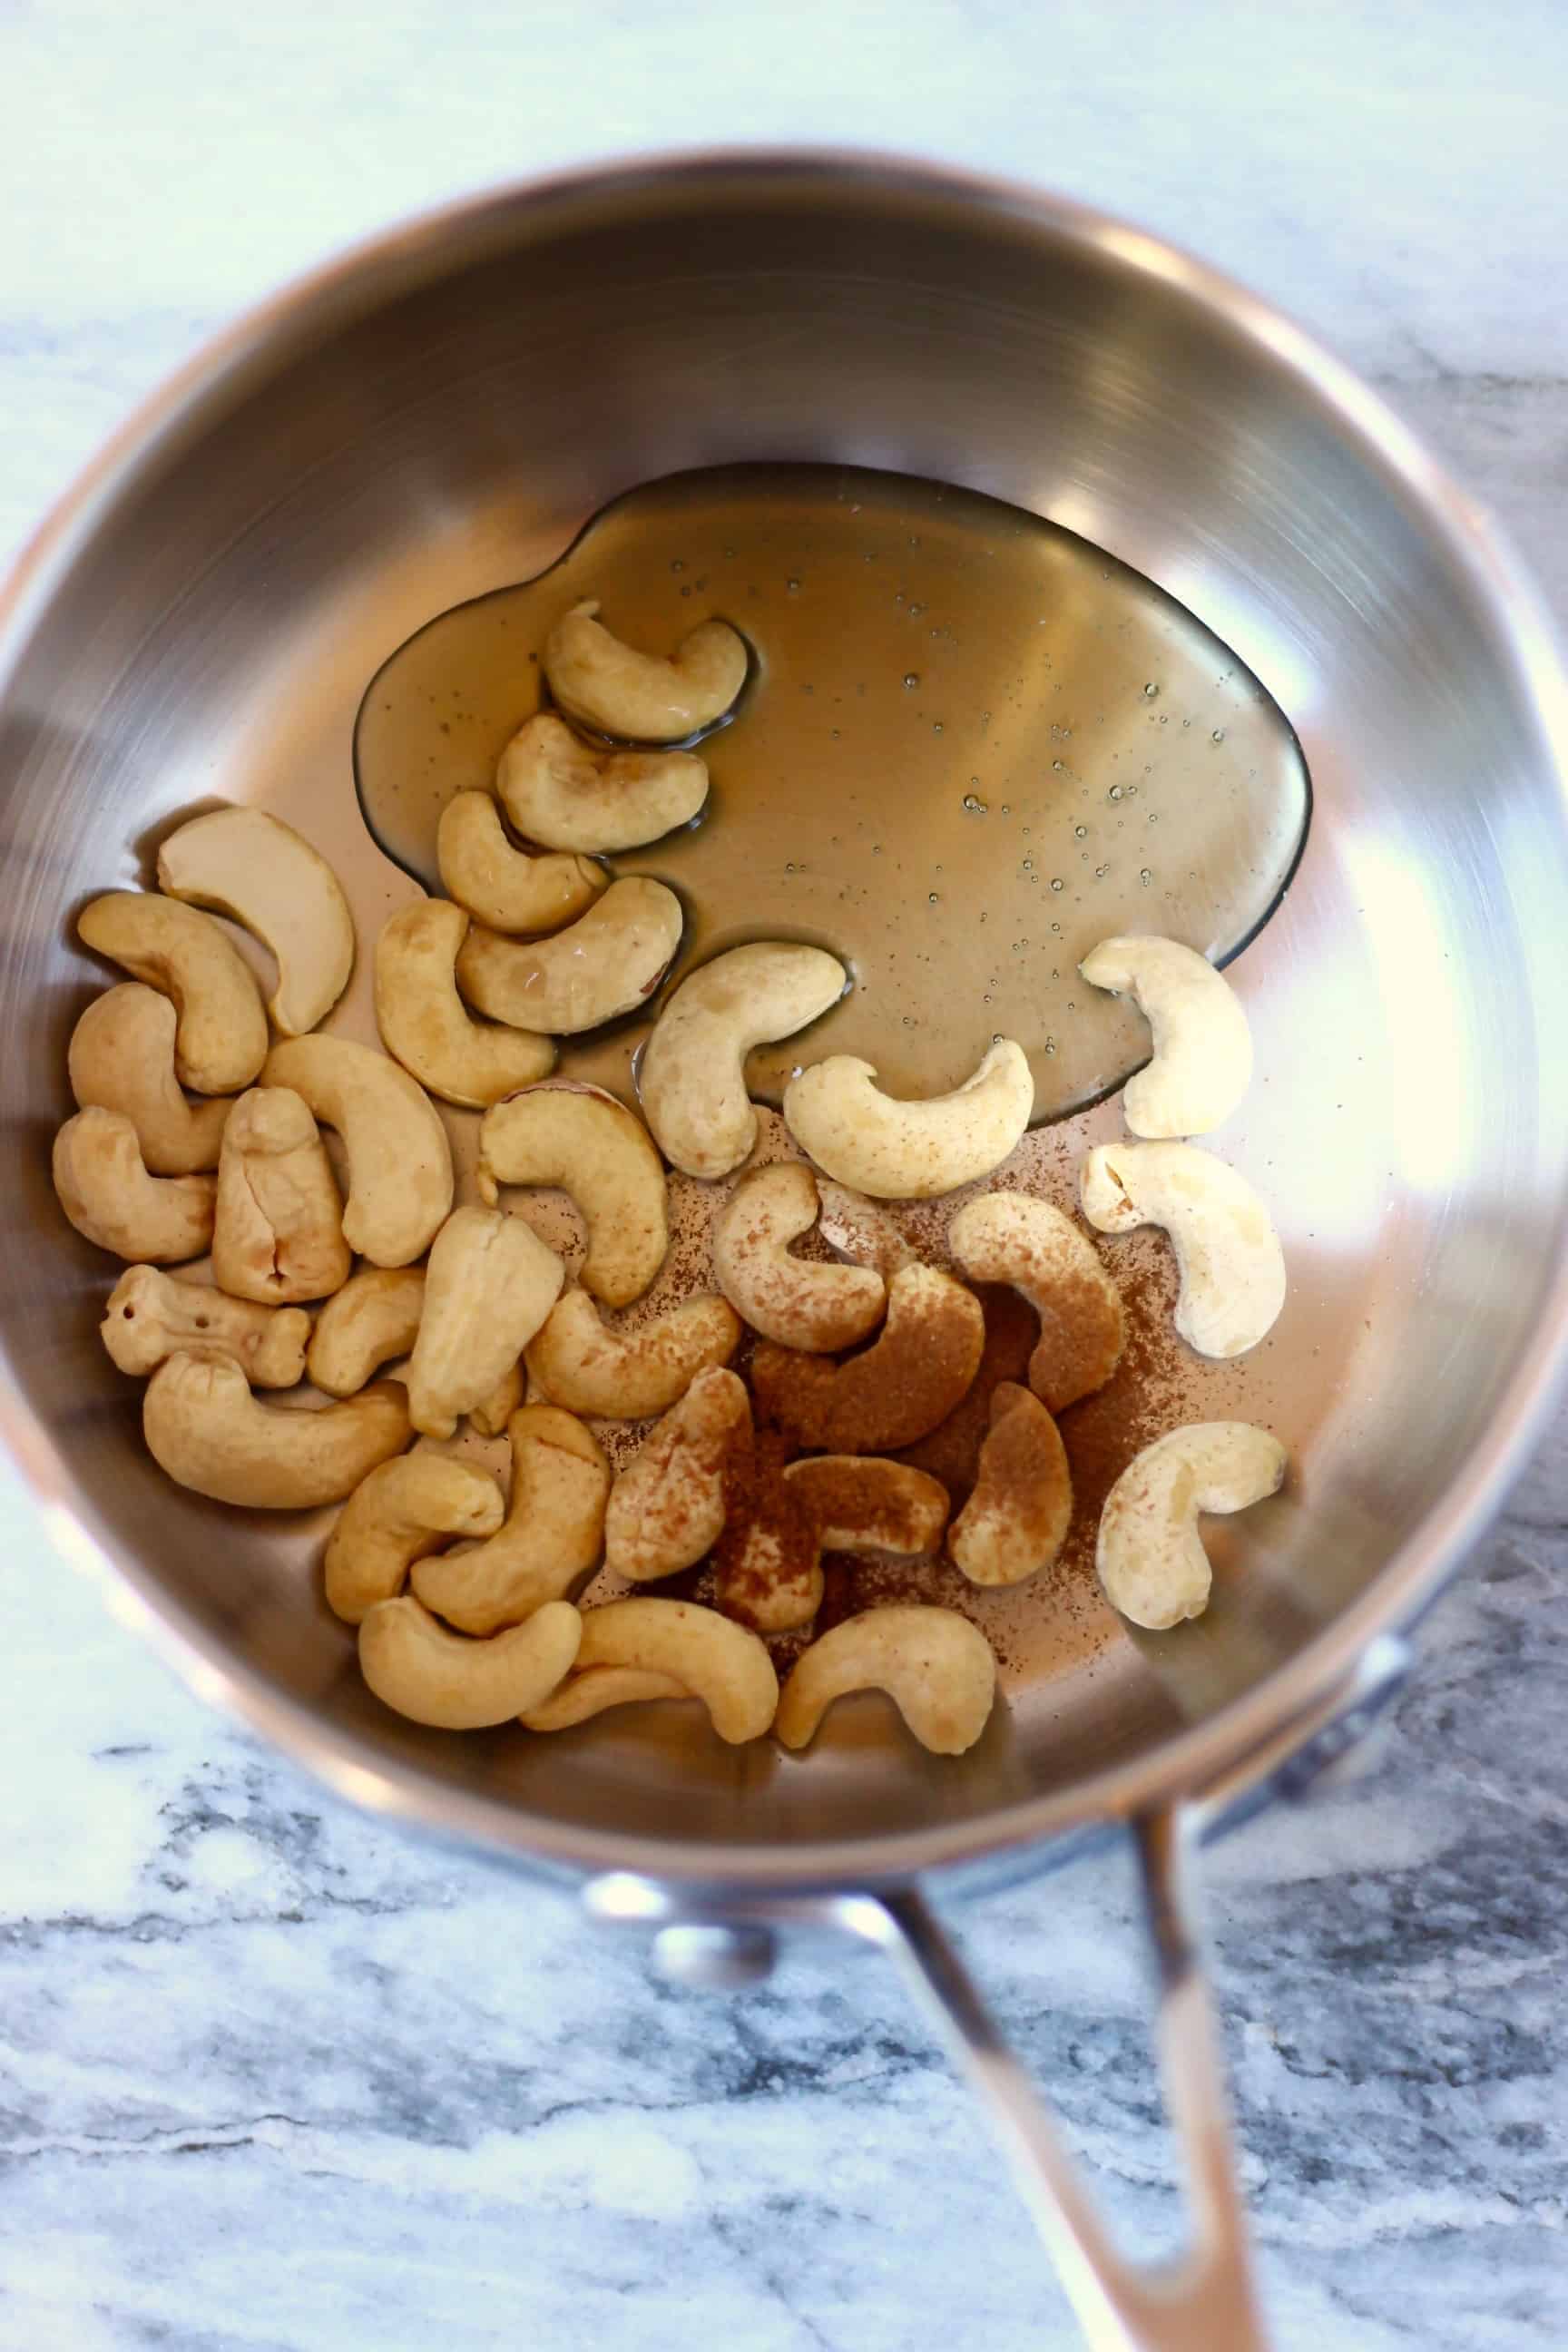 Cashew nuts, maple syrup and ground spices in a pan against a marble background